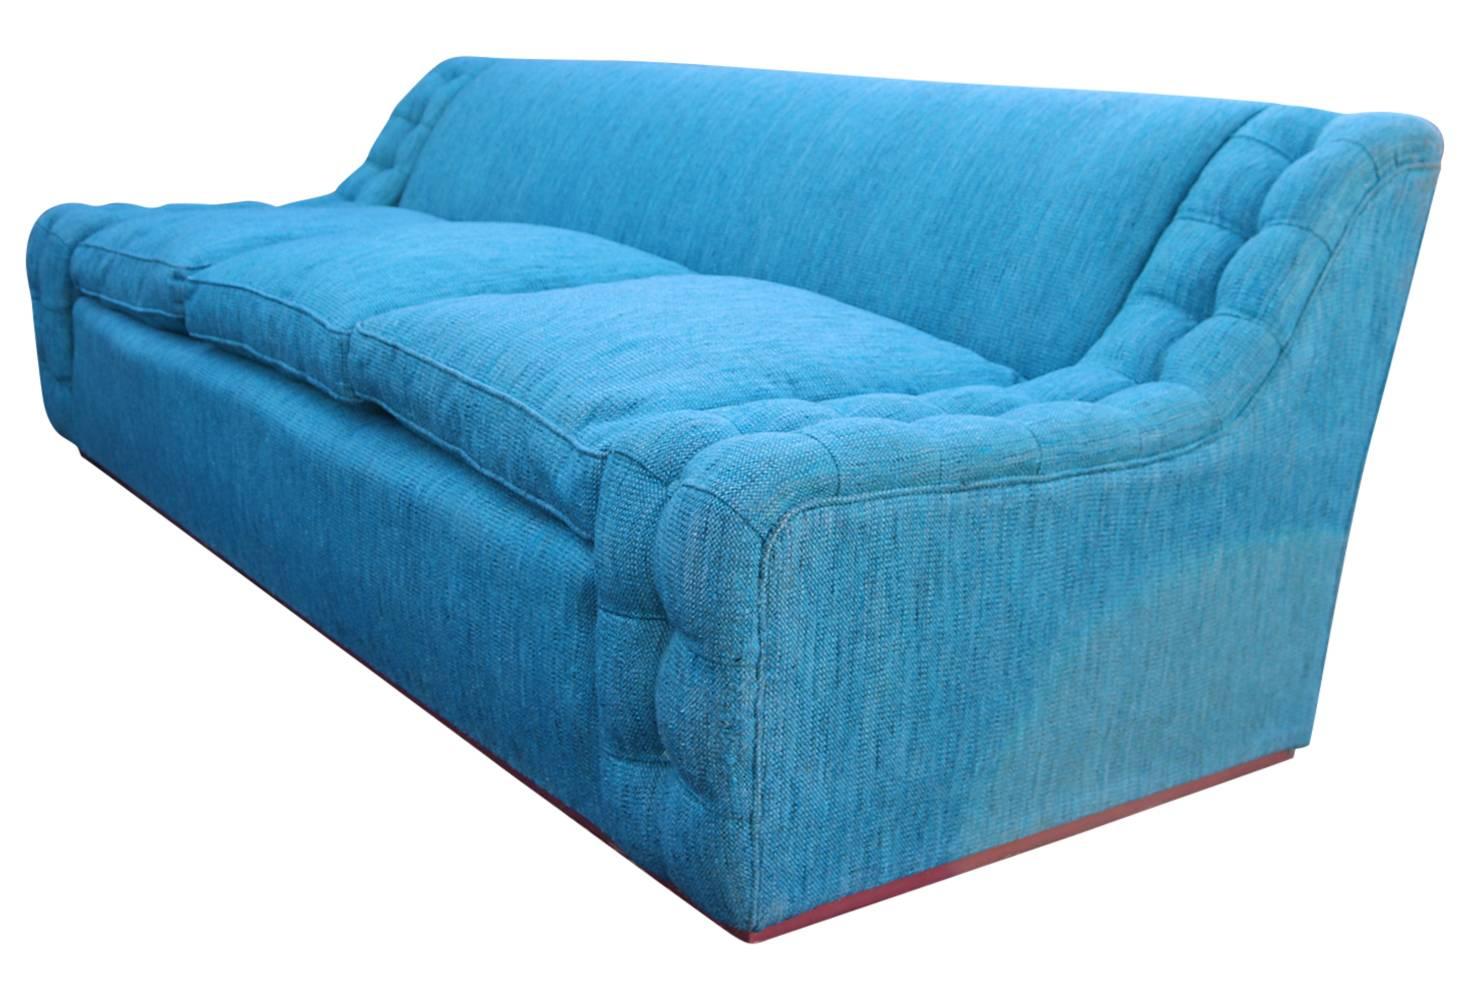 Mid-Century Modern Blue Plinth Based Sofa with Tufted Arms